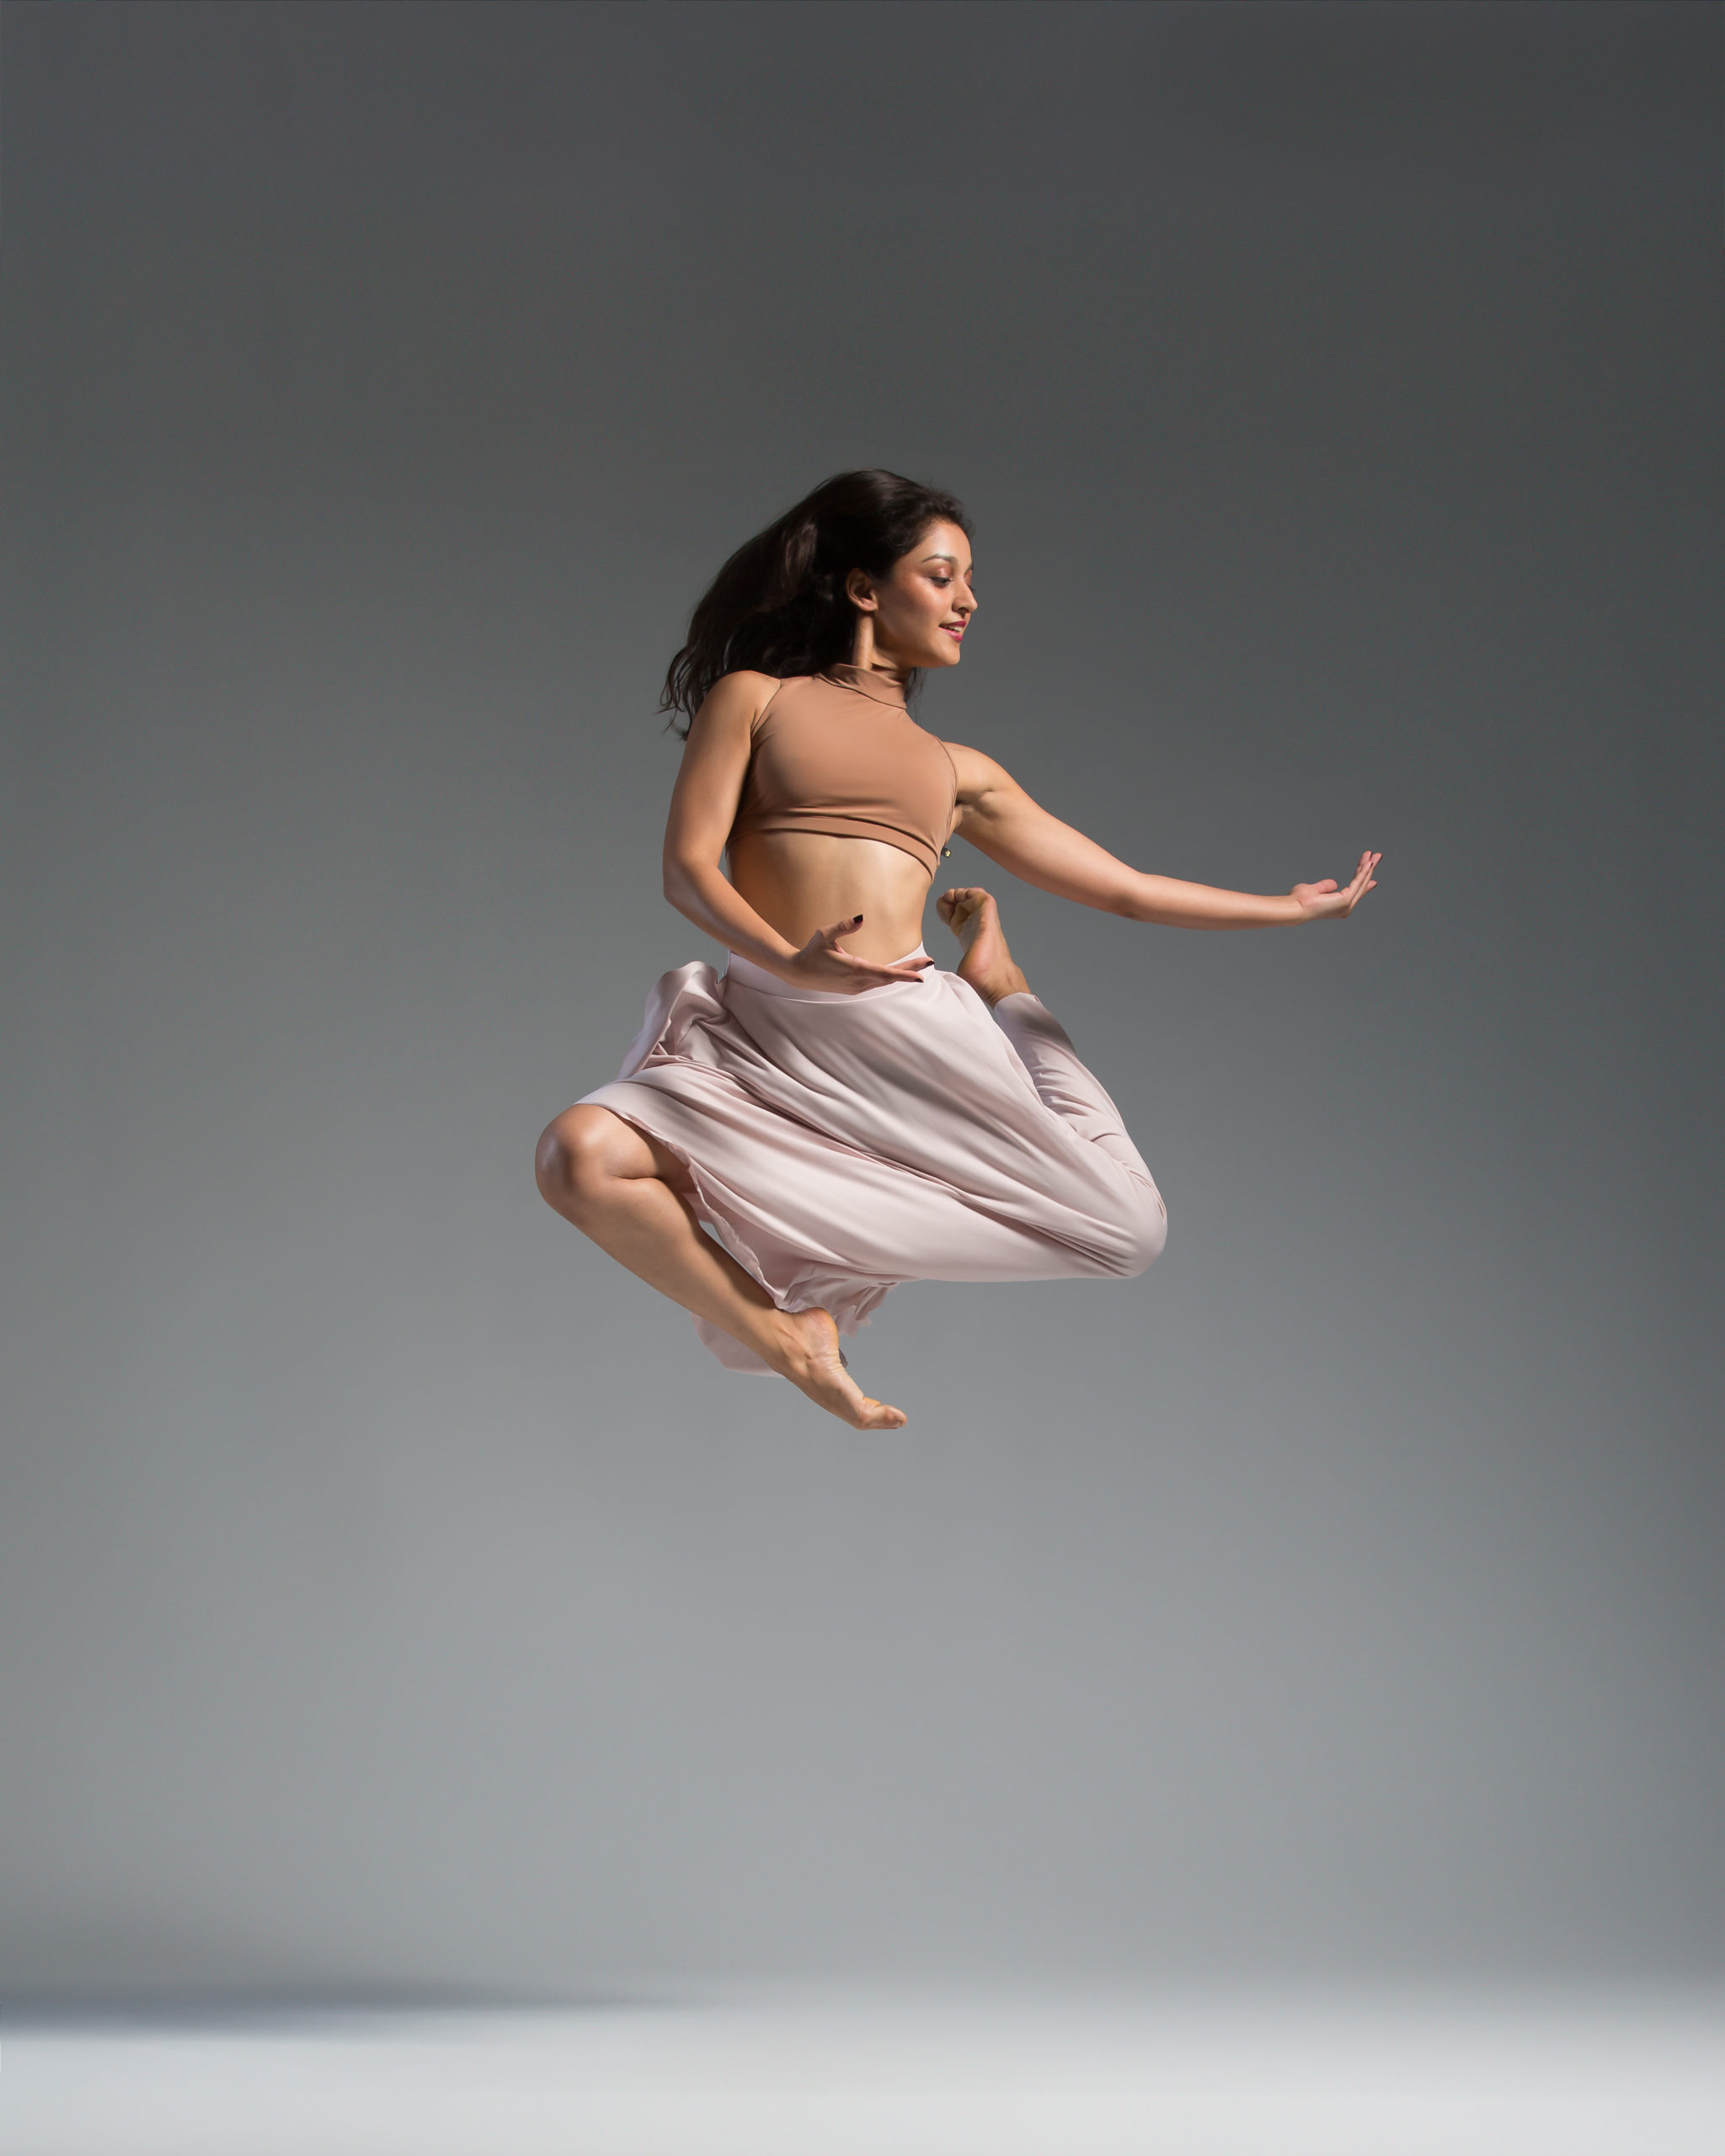 A woman in white leotard jumping up into the air.